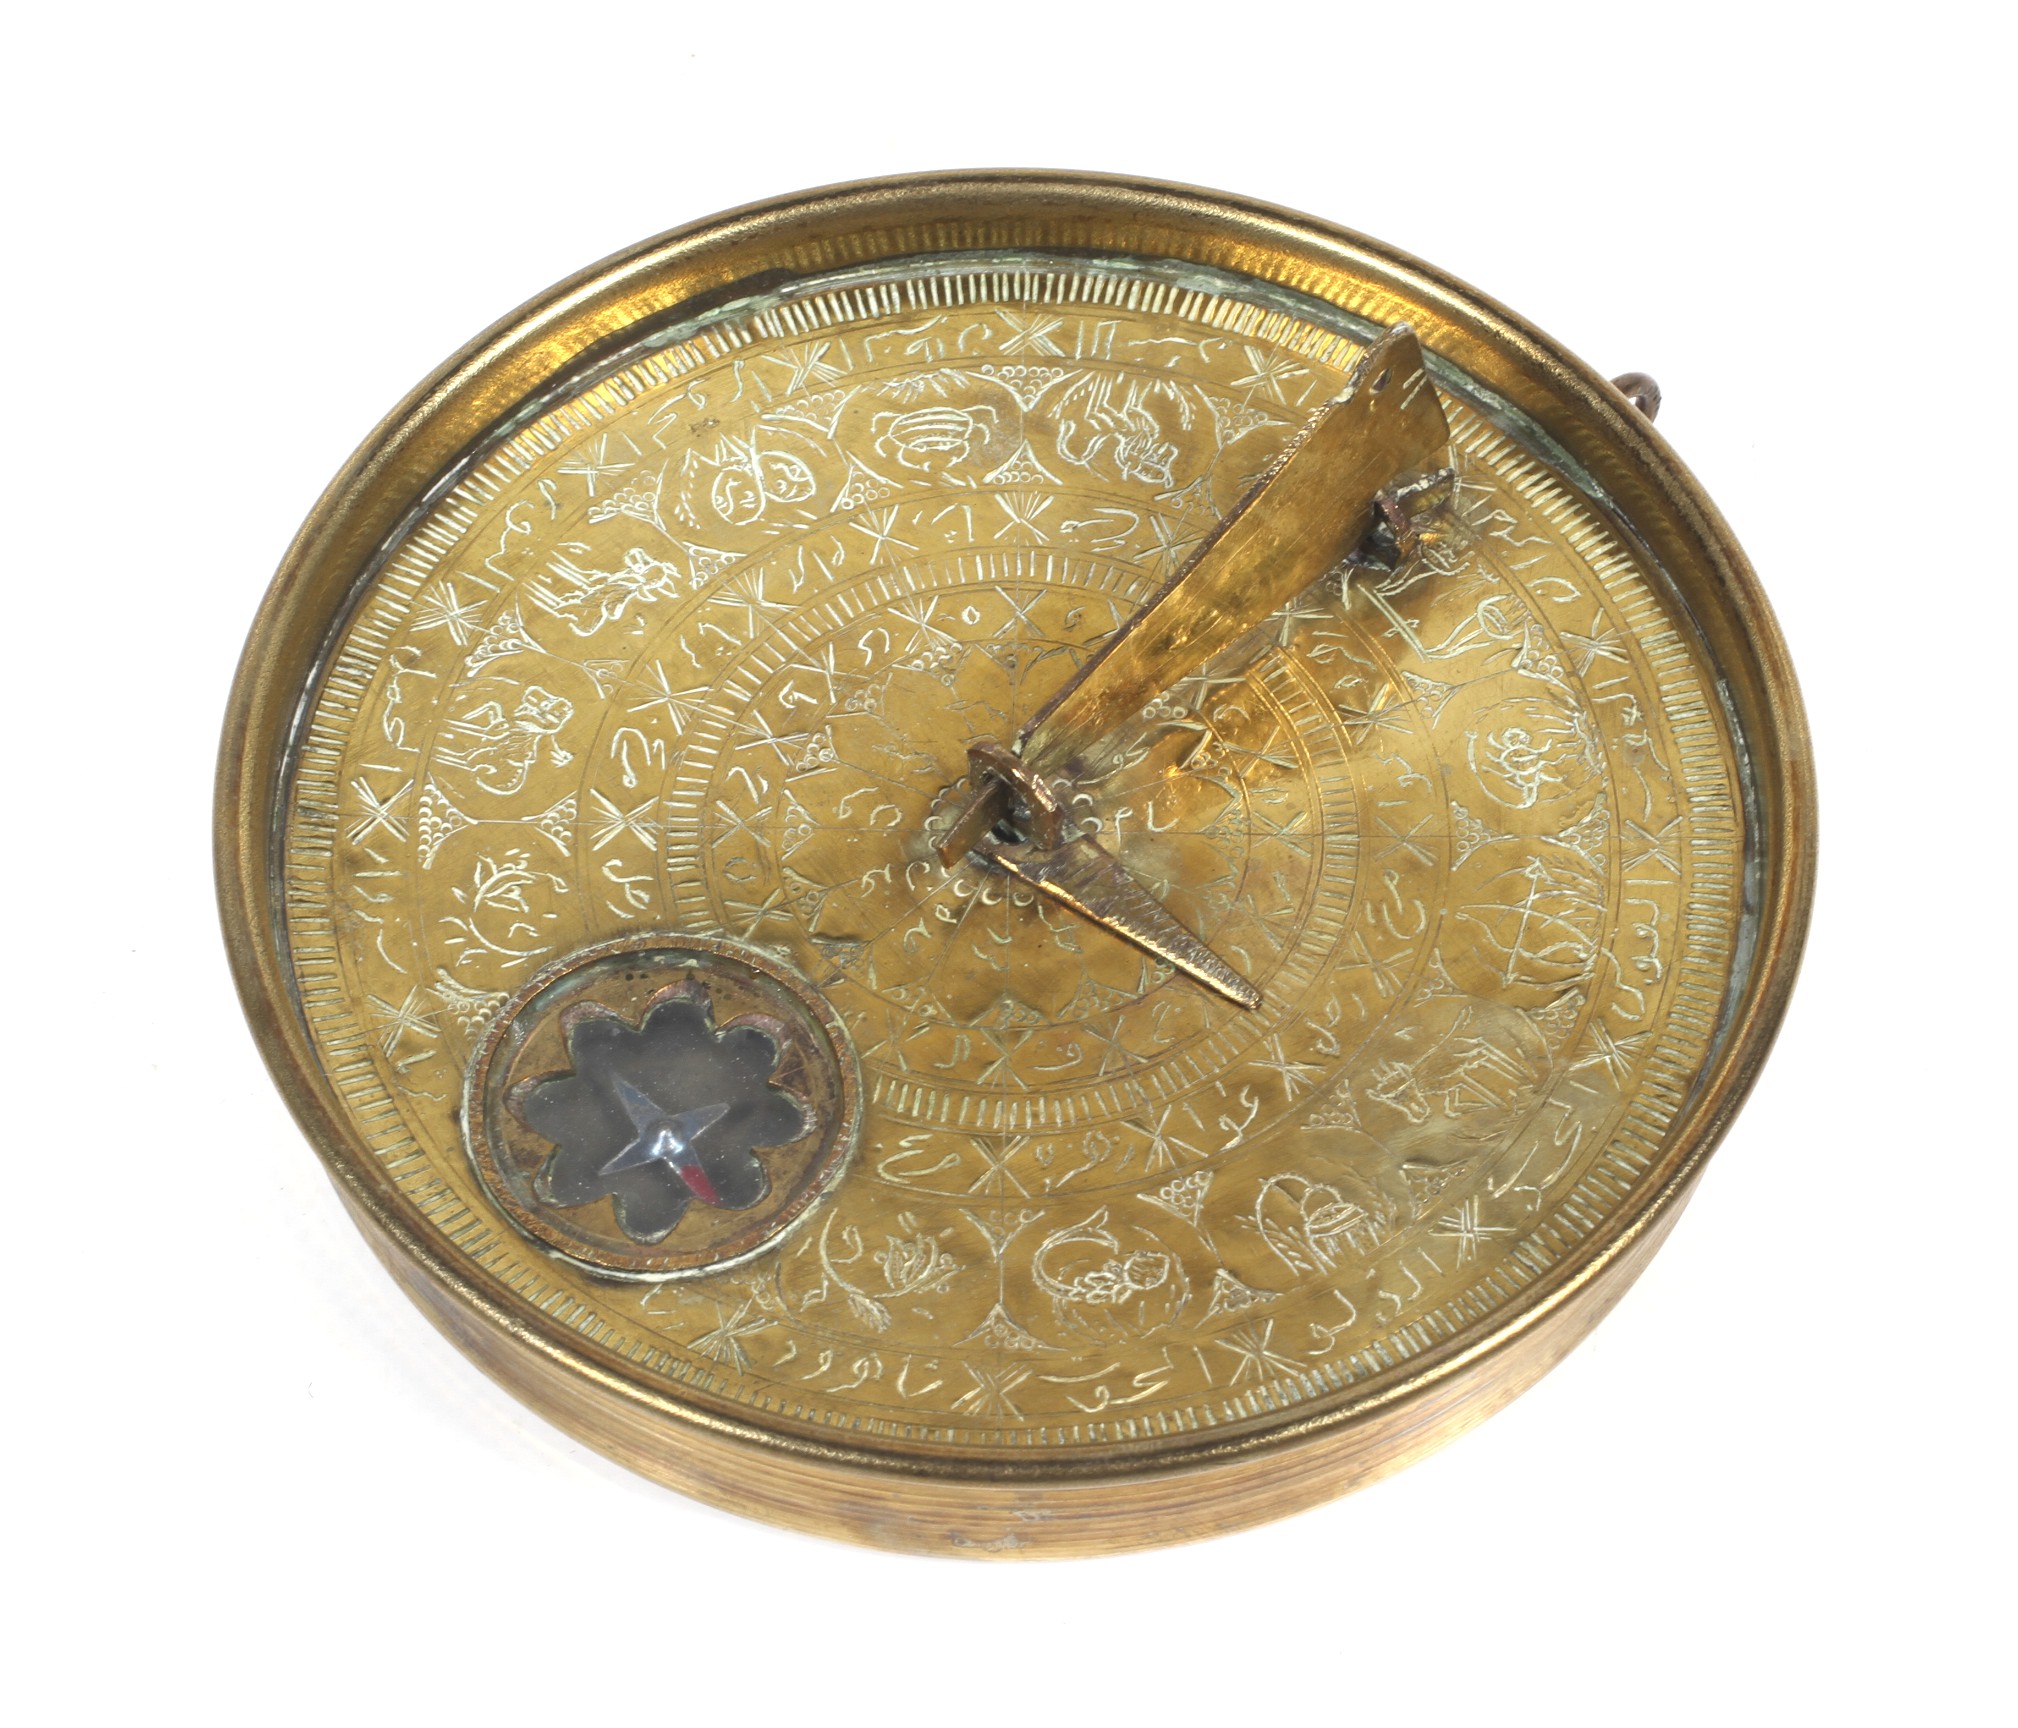 A brass Islamic sundial. Engraved with concentric borders including one with signs of the zodiac.